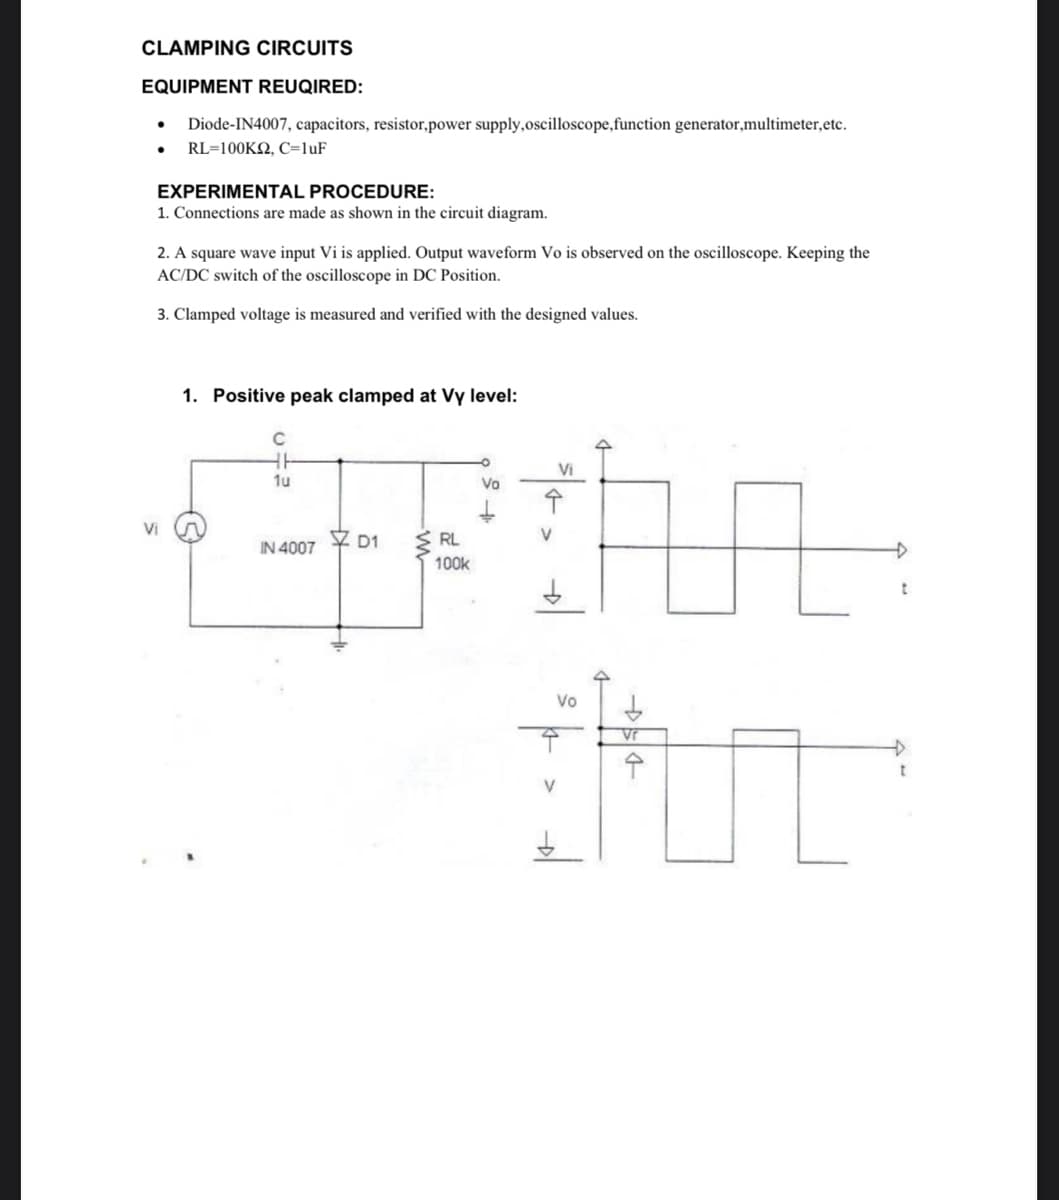 CLAMPING CIRCUITS
EQUIPMENT REUQIRED:
Diode-IN4007, capacitors, resistor,power supply, oscilloscope,function generator,multimeter, etc.
● RL=100KQ, C=1uF
●
EXPERIMENTAL PROCEDURE:
1. Connections are made as shown in the circuit diagram.
2. A square wave input Vi is applied. Output waveform Vo is observed on the oscilloscope. Keeping the
AC/DC switch of the oscilloscope in DC Position.
3. Clamped voltage is measured and verified with the designed values.
Vi
1. Positive peak clamped at Vy level:
C
HH
1u
IN 4007
D1
RL
100k
Vo
L
Vr
Gur
수
Vi
↑
V
Vo
V
t